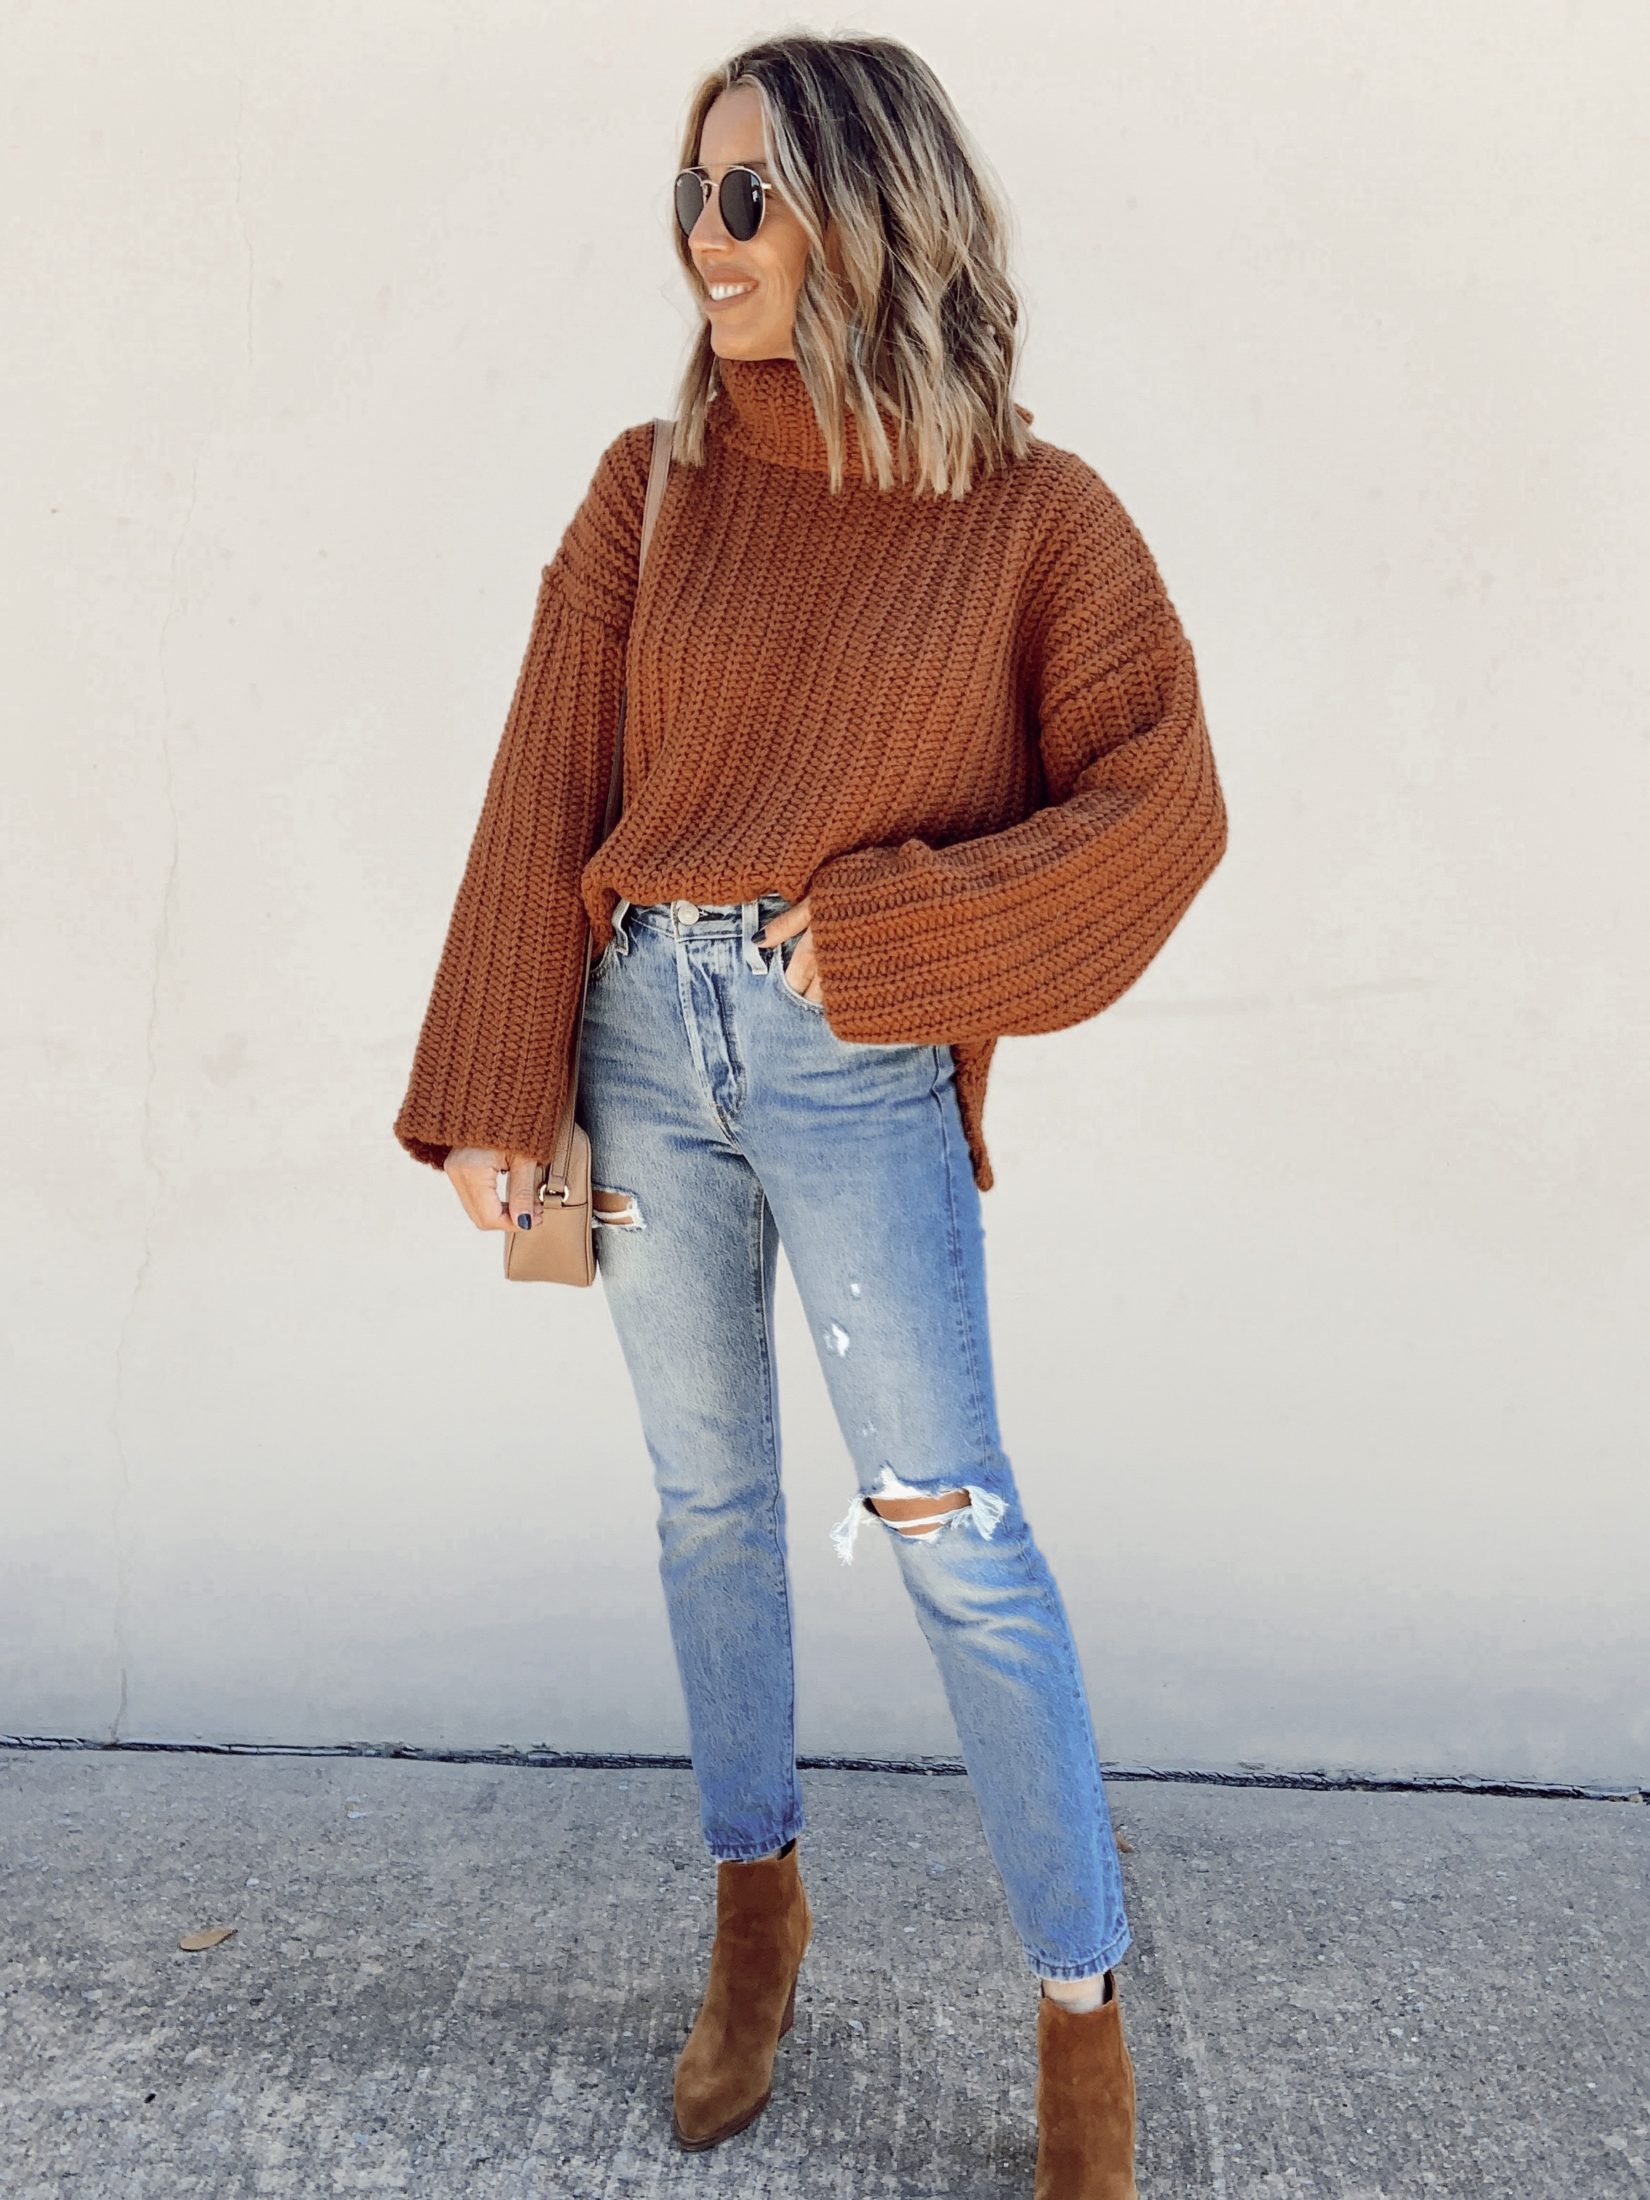 2 Ways to Wear a Turtleneck Sweater // Dressed Up or Down | The Real ...